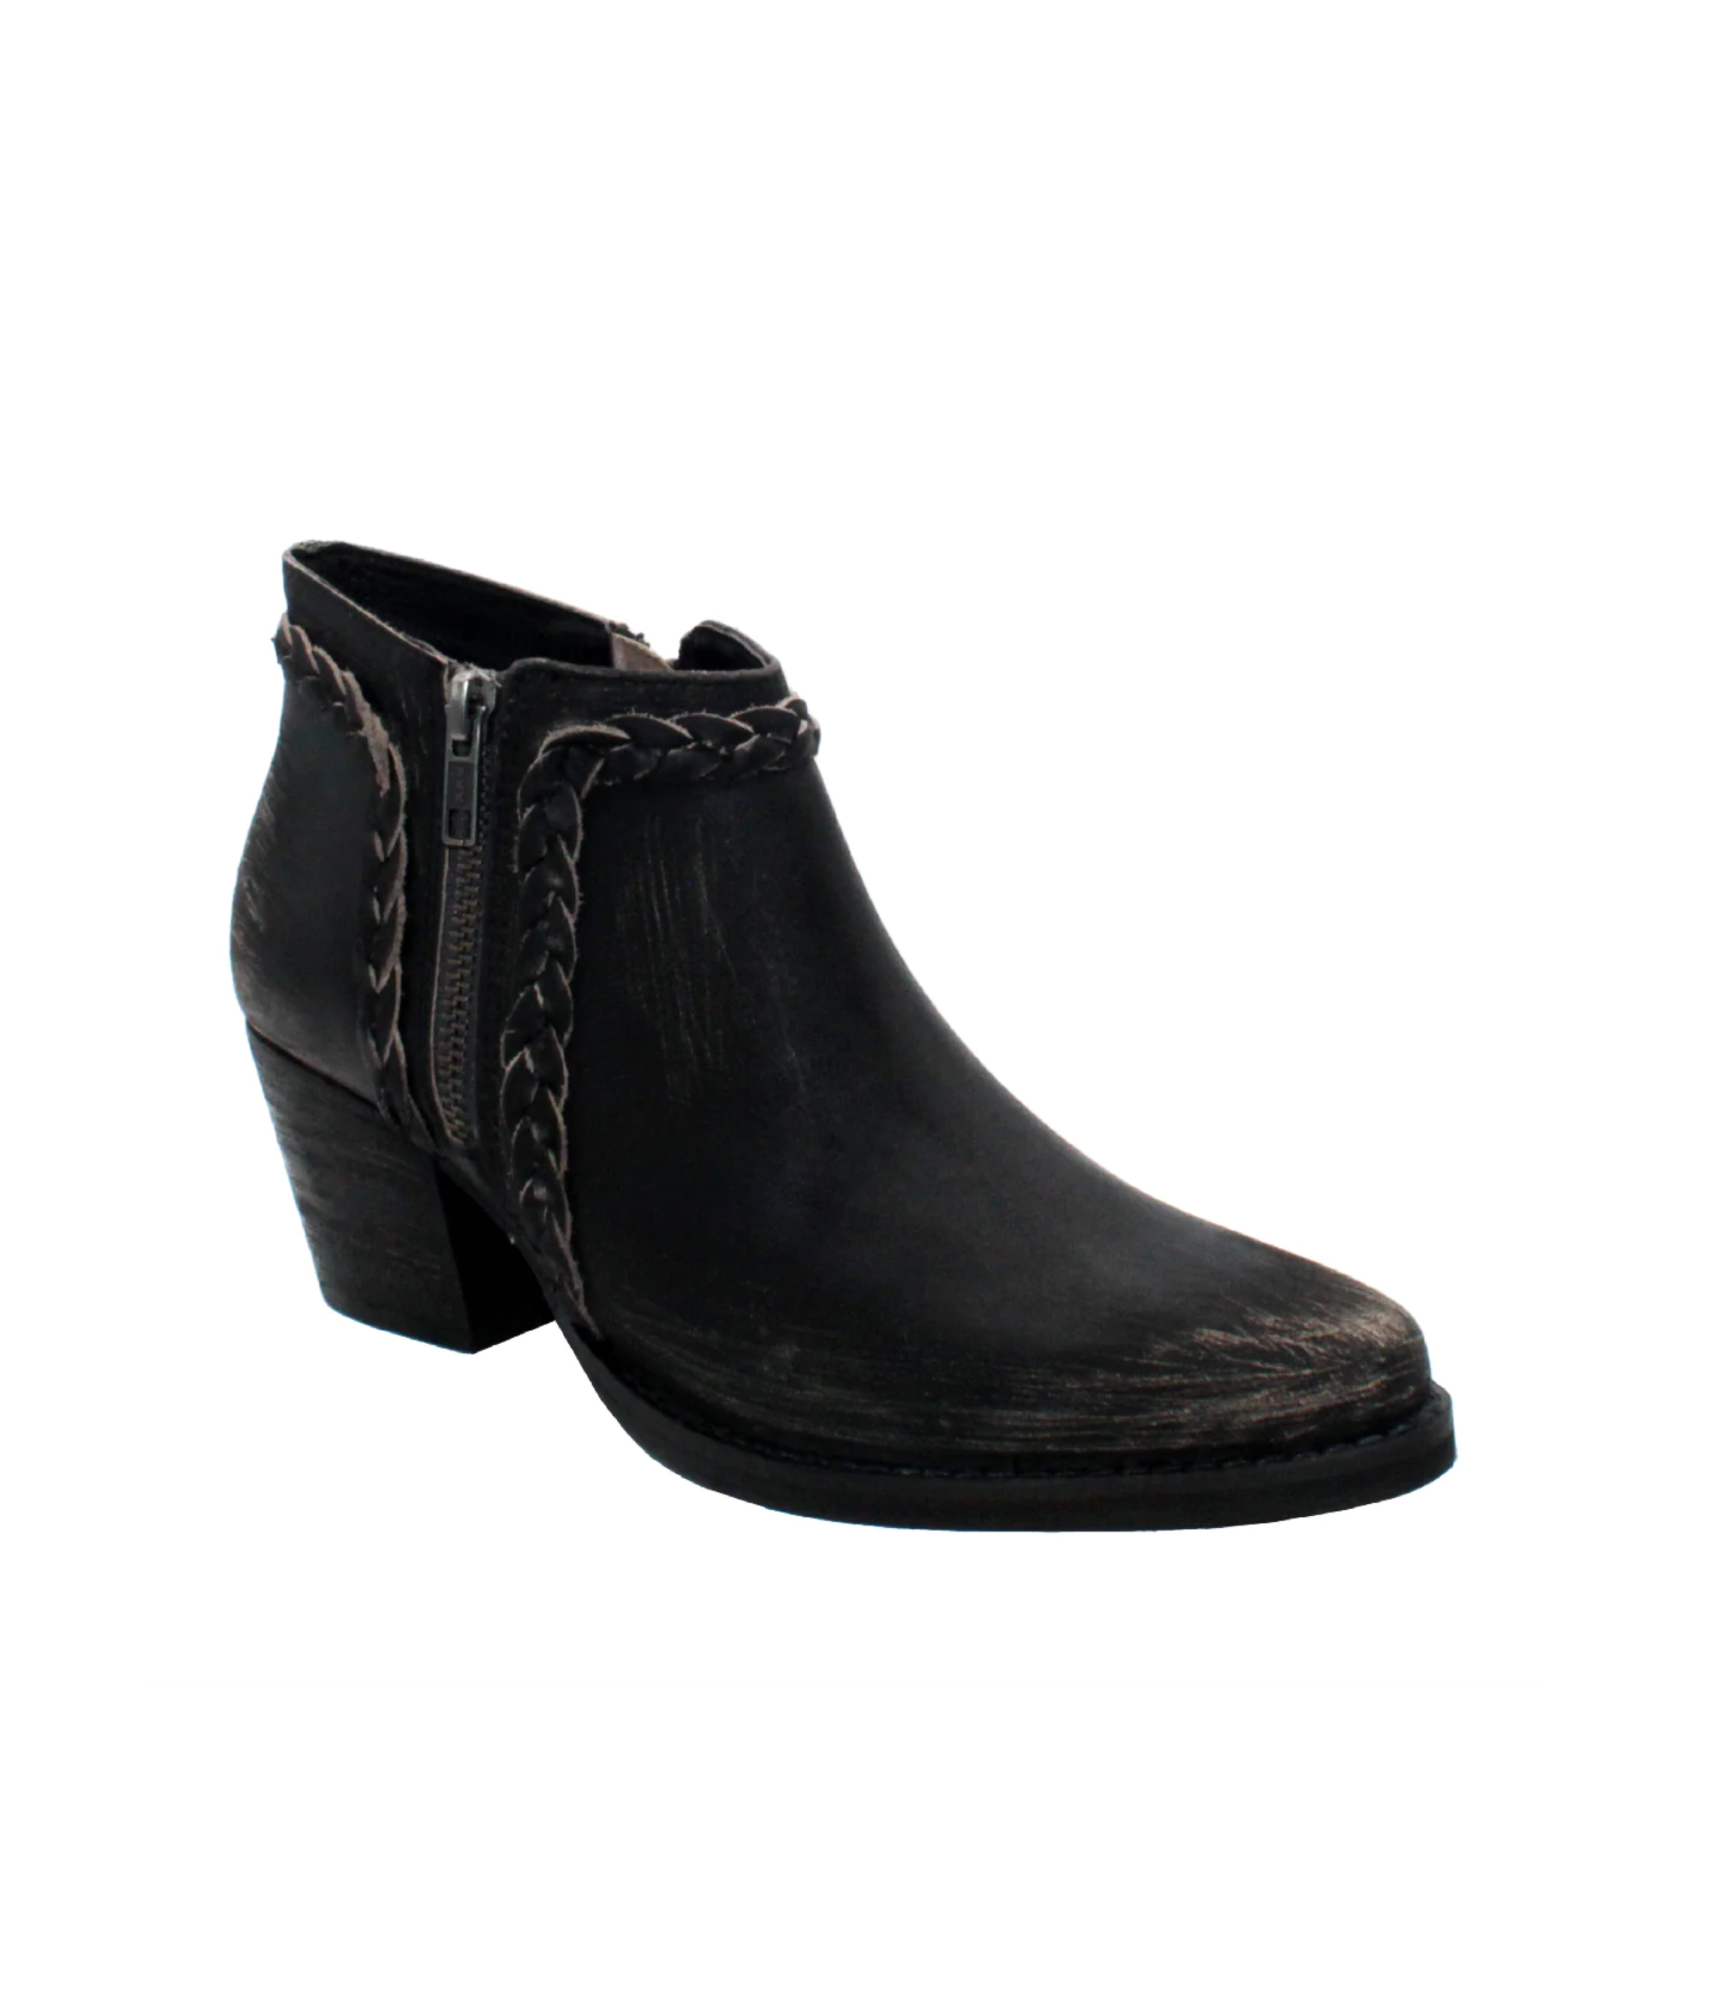 Bronco Braided Ankle Boots in Black